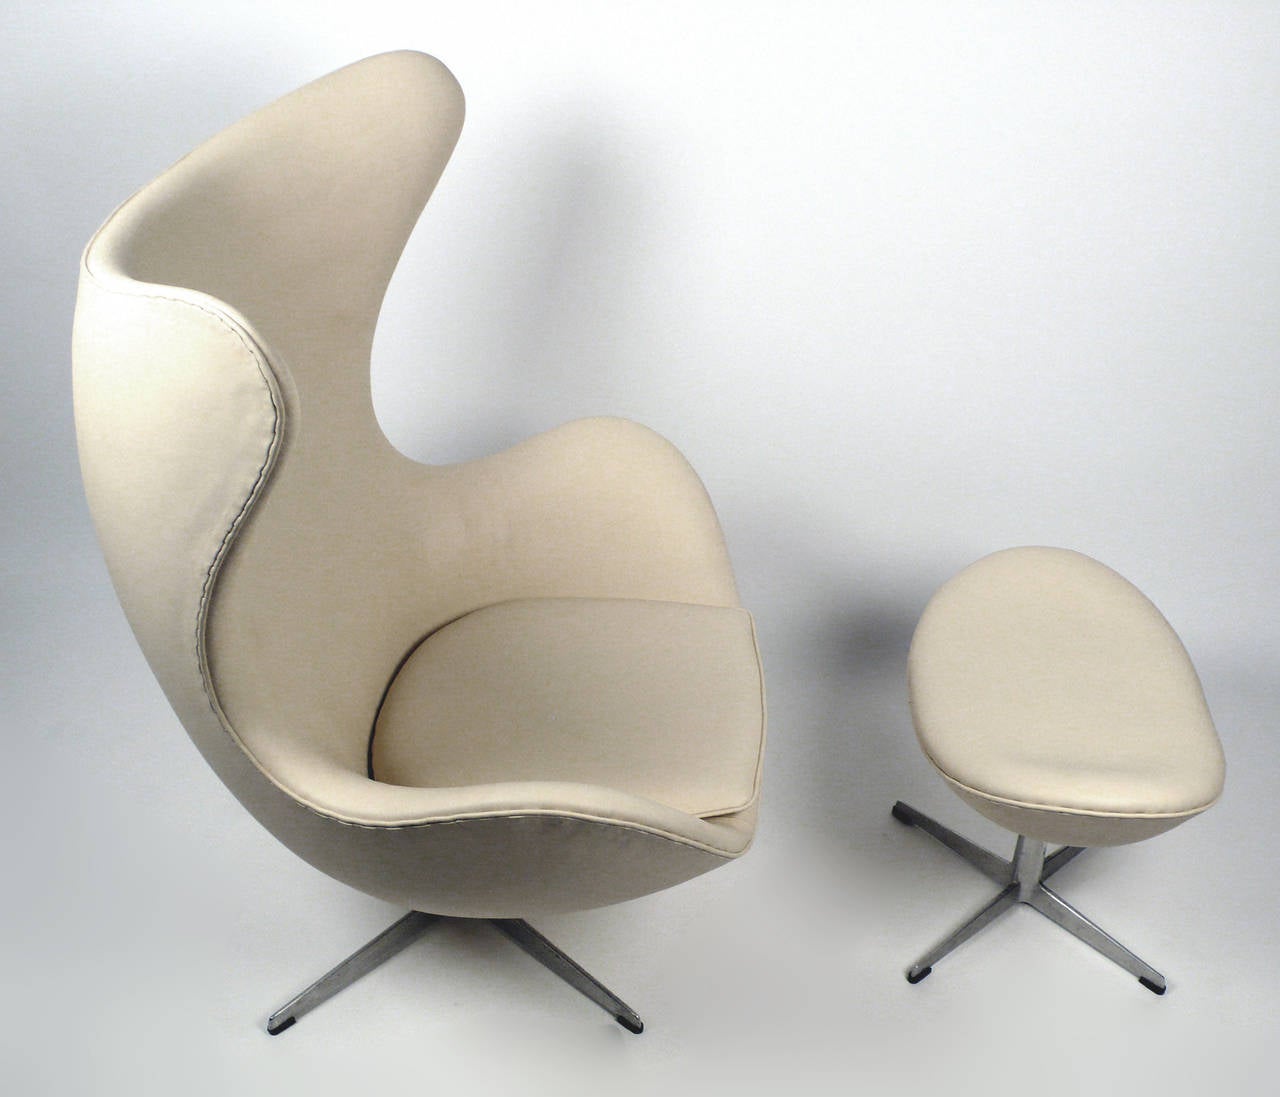 Danish Early Production Leather Egg Chair with Matching Ottoman by Arne Jacobsen